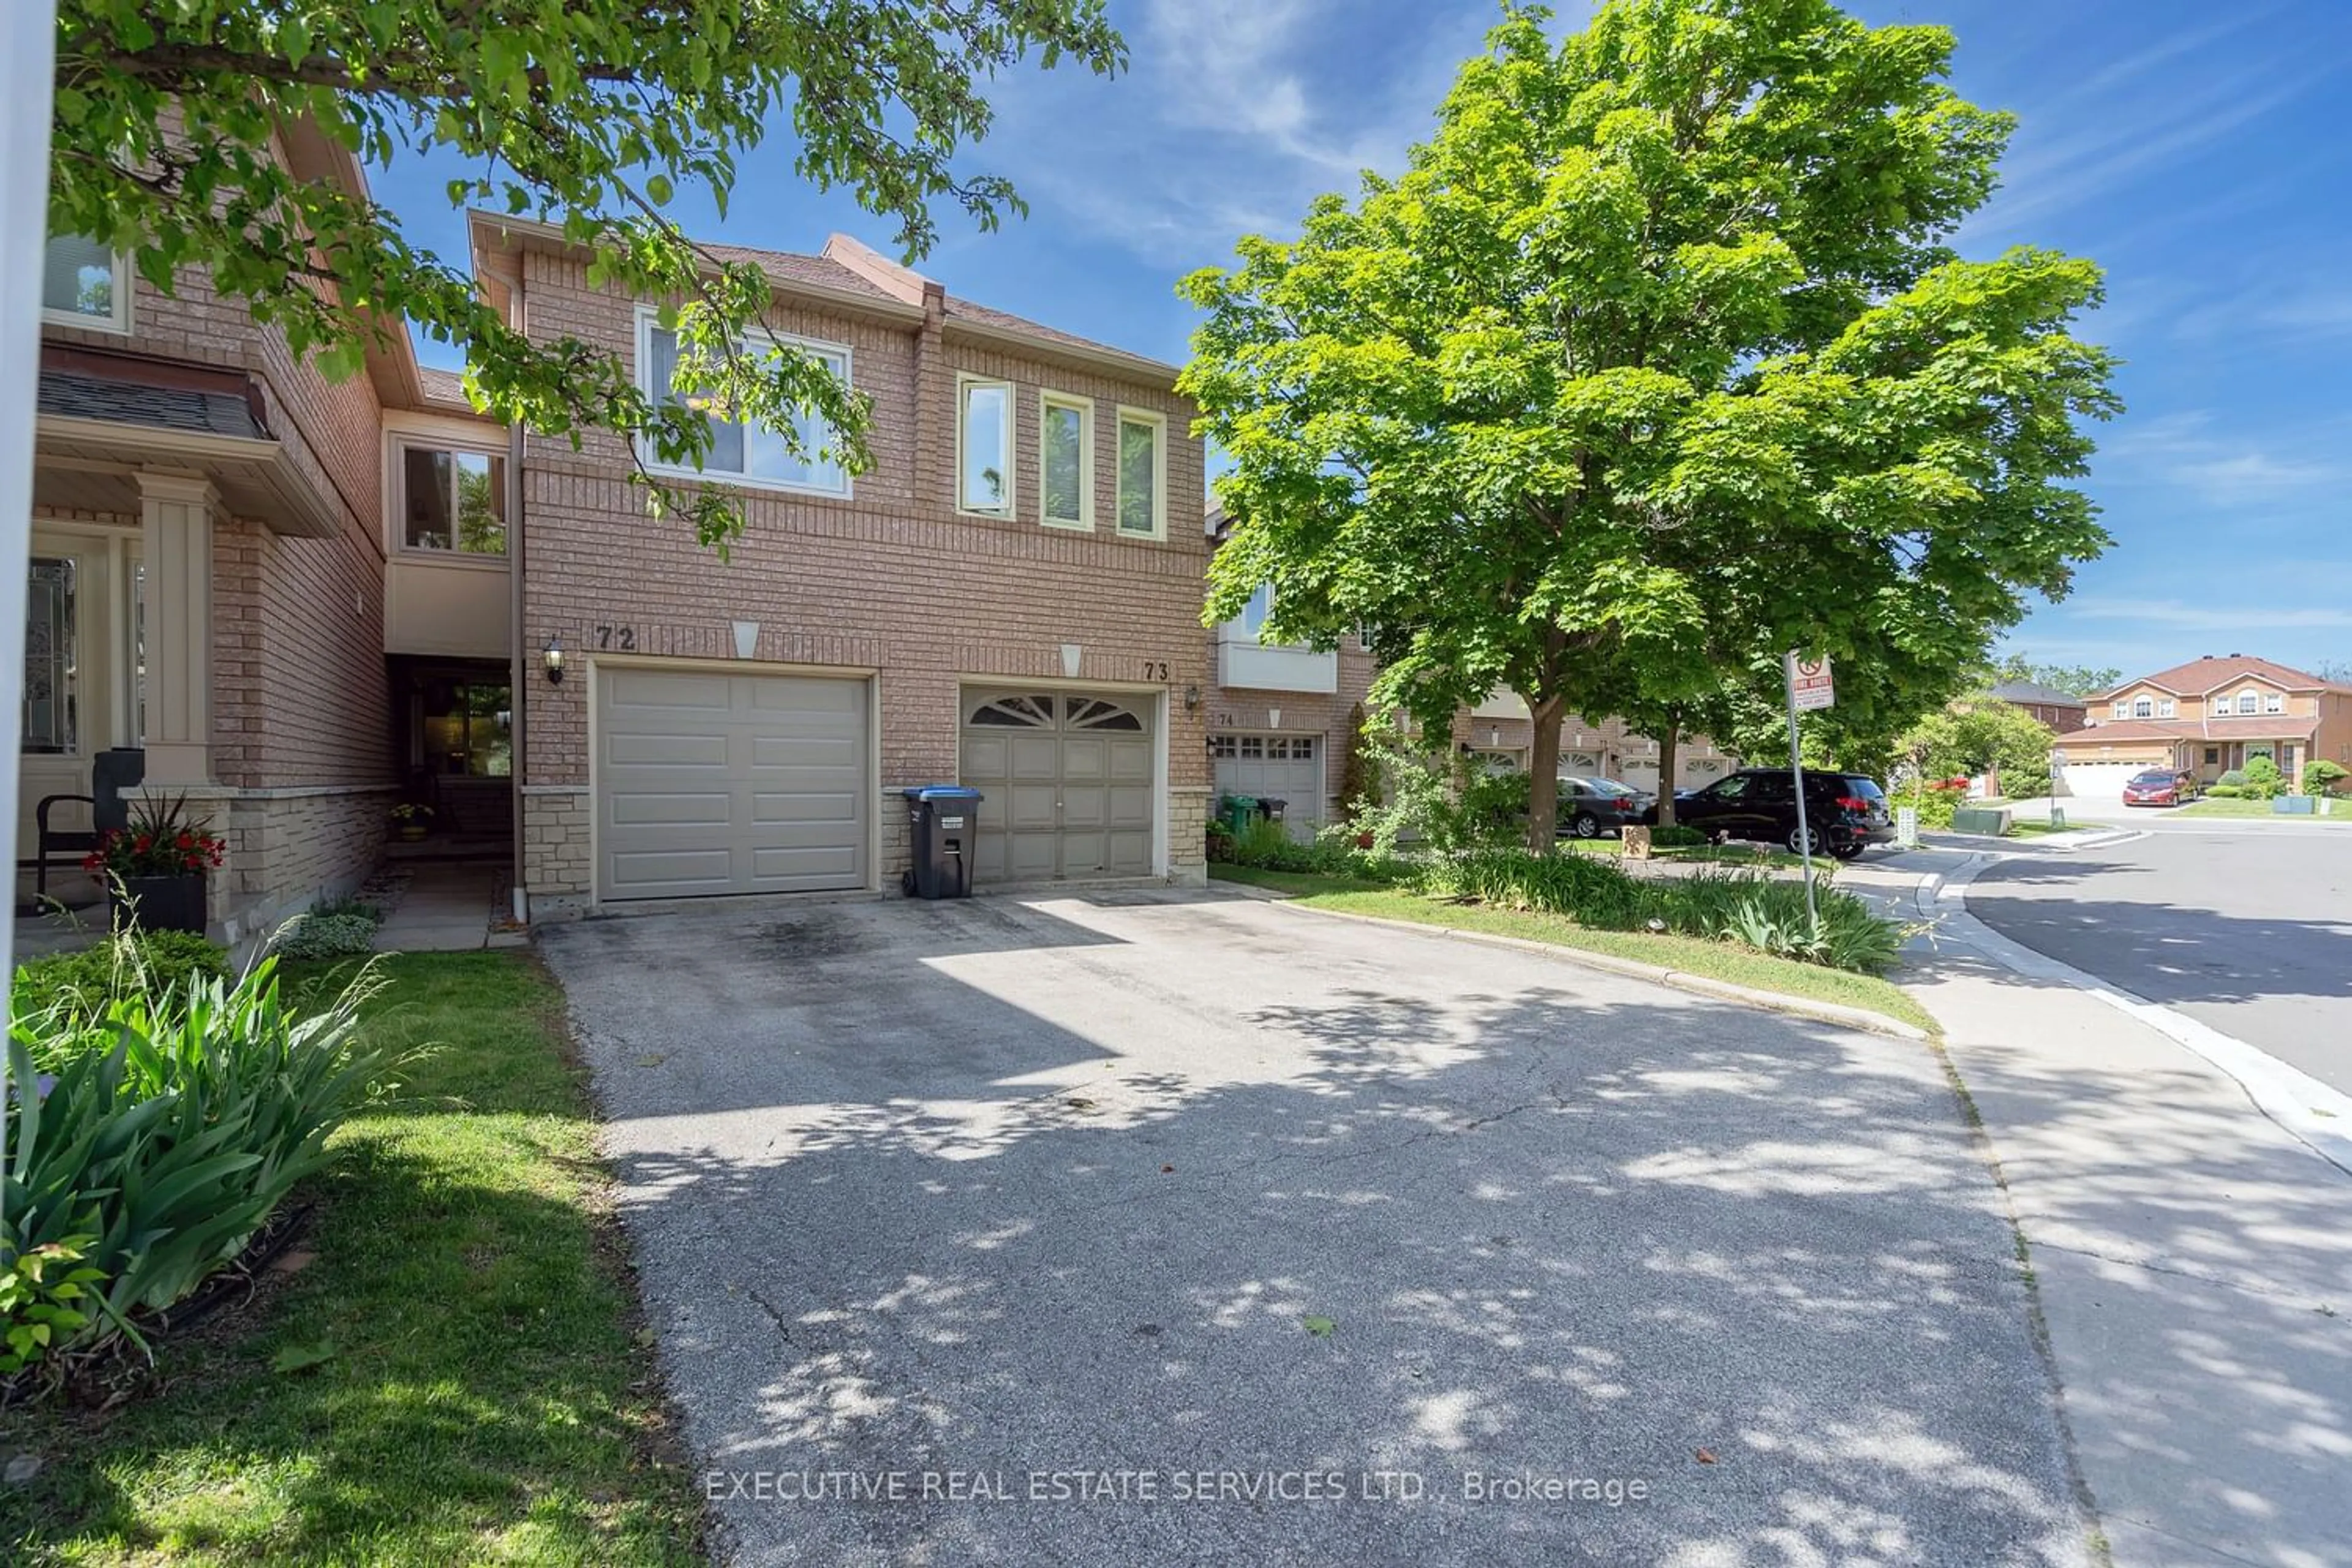 A pic from exterior of the house or condo for 5420 Fallingbrook Dr #72, Mississauga Ontario L5V 2H6